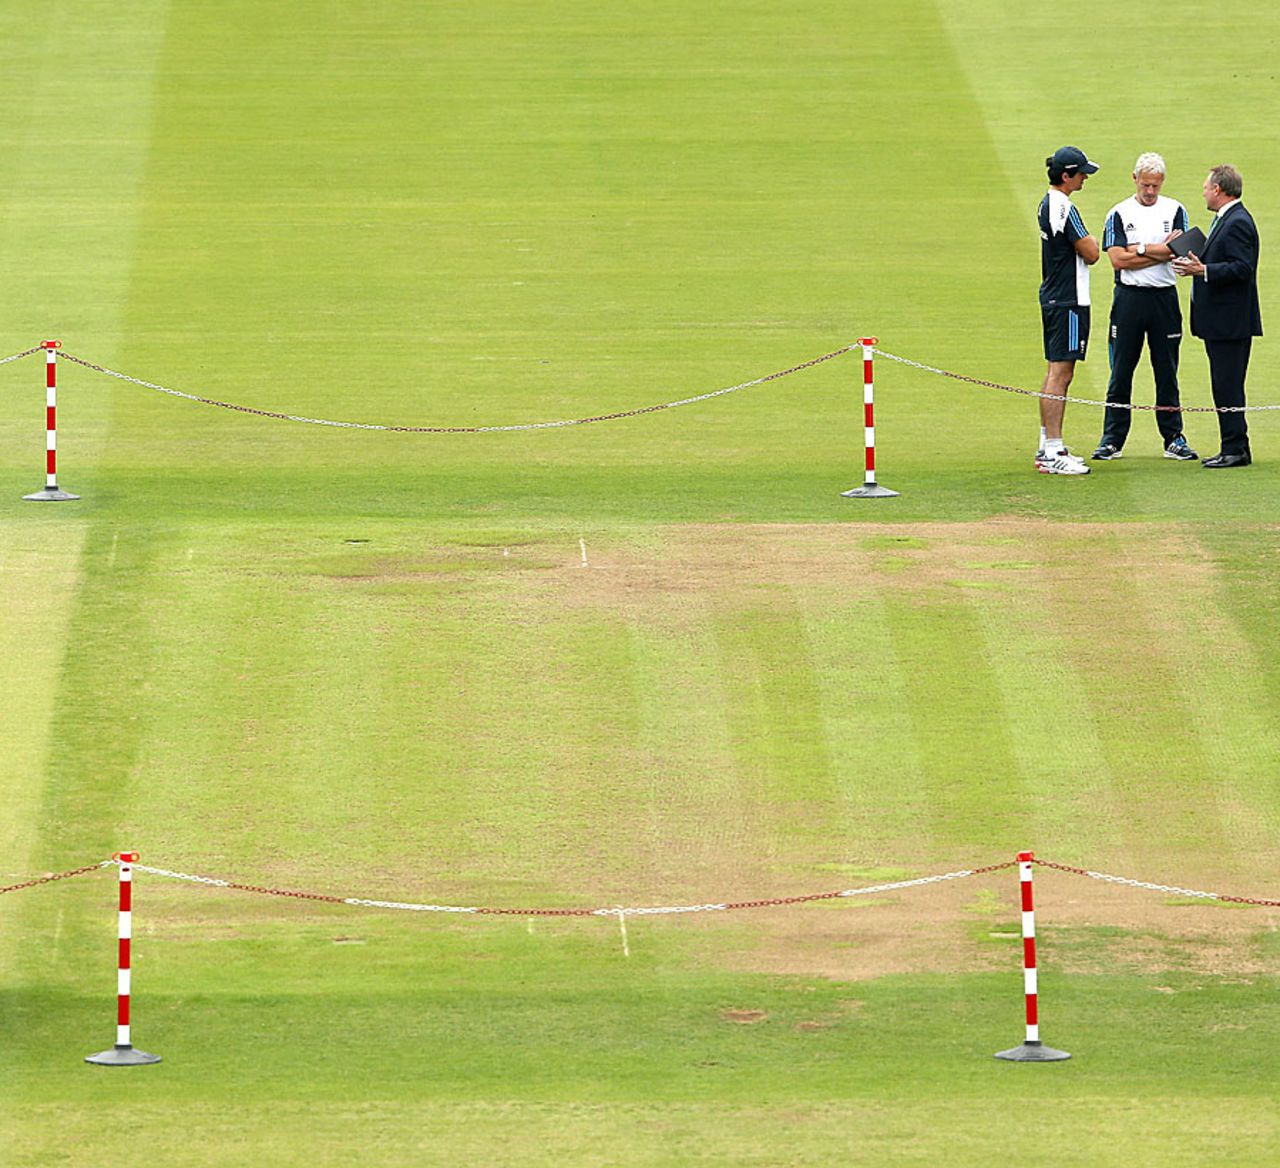 The Lord's pitch two days before the second Test, Lord's, July 15, 2014